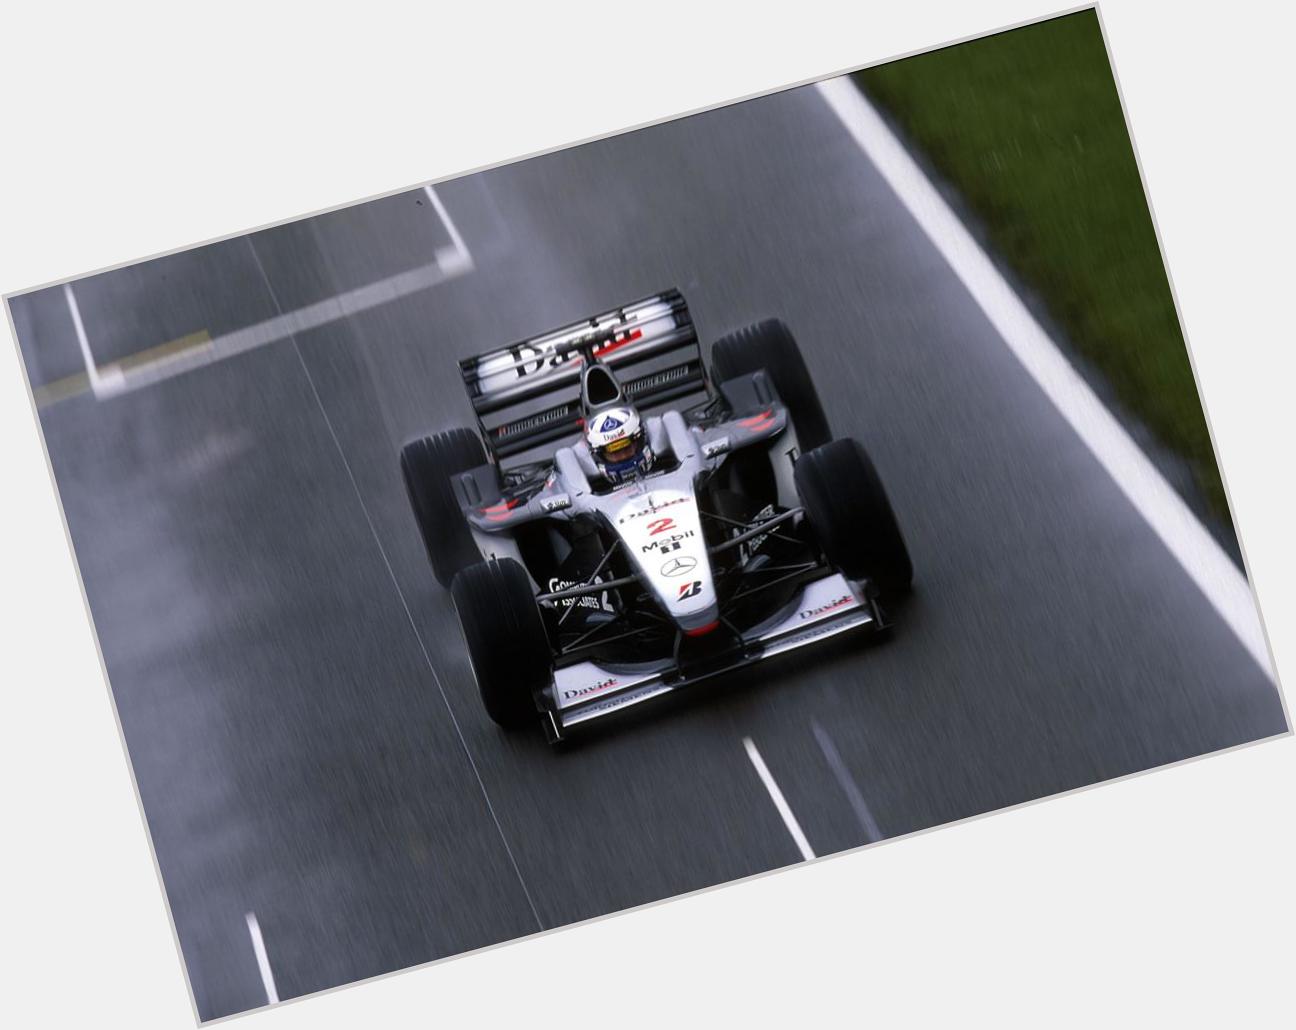 Happy Birthday to David Coulthard. Victory at Silverstone in 2000 driving McLaren MP4/15  